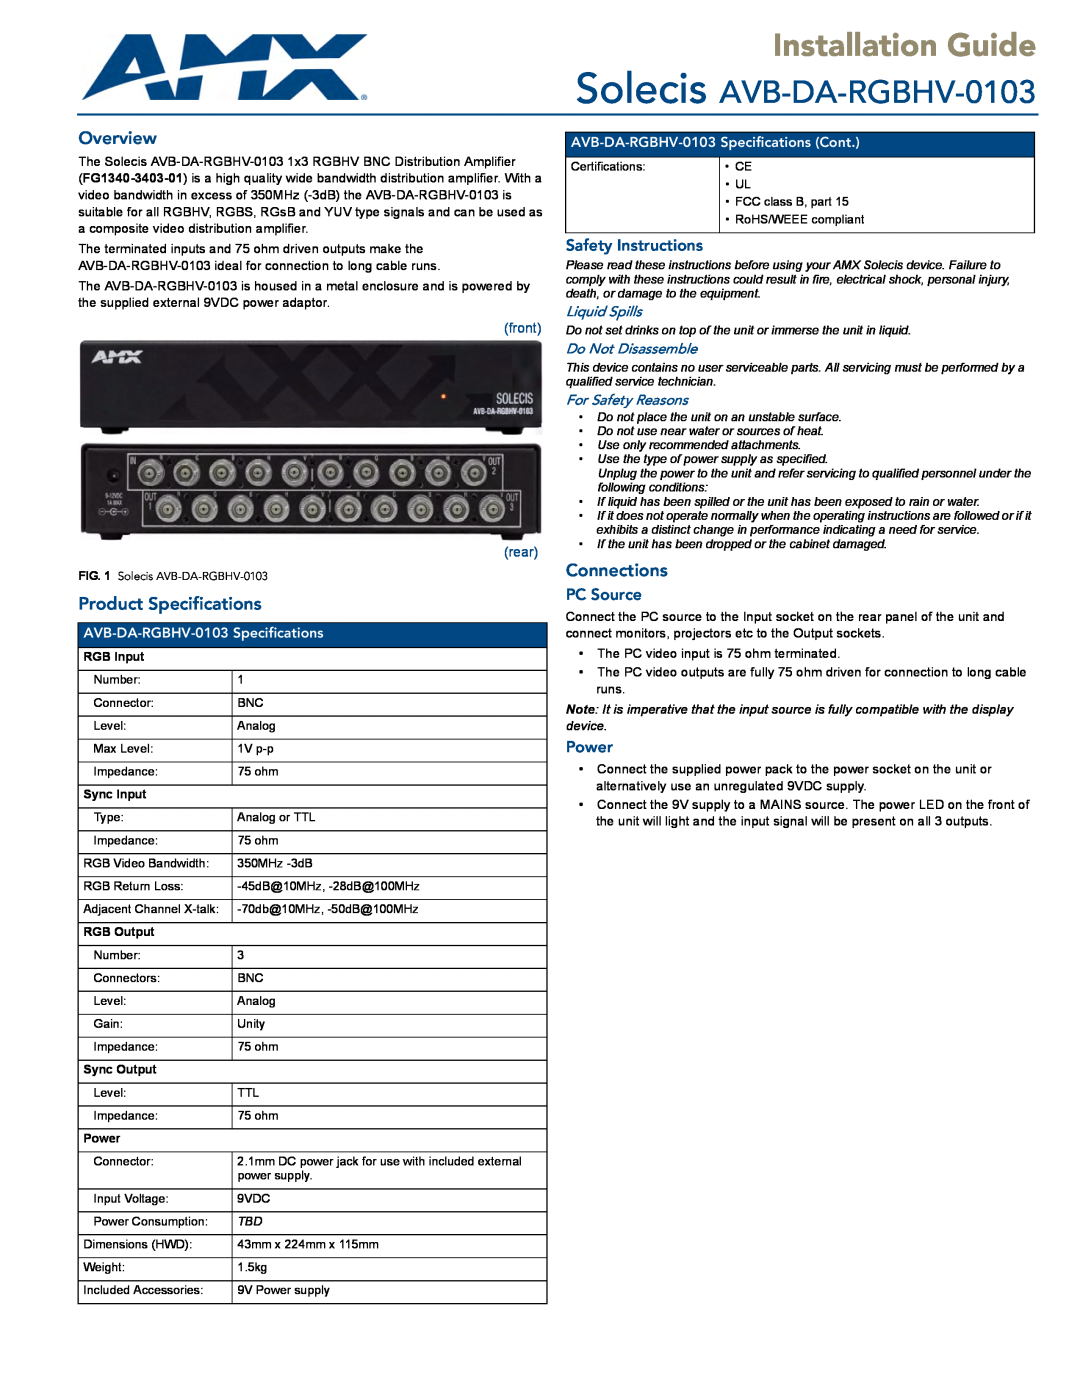 AMX specifications Installation Guide, Solecis AVB-DA-RGBHV-0103, Overview, Product Specifications, Connections, Power 